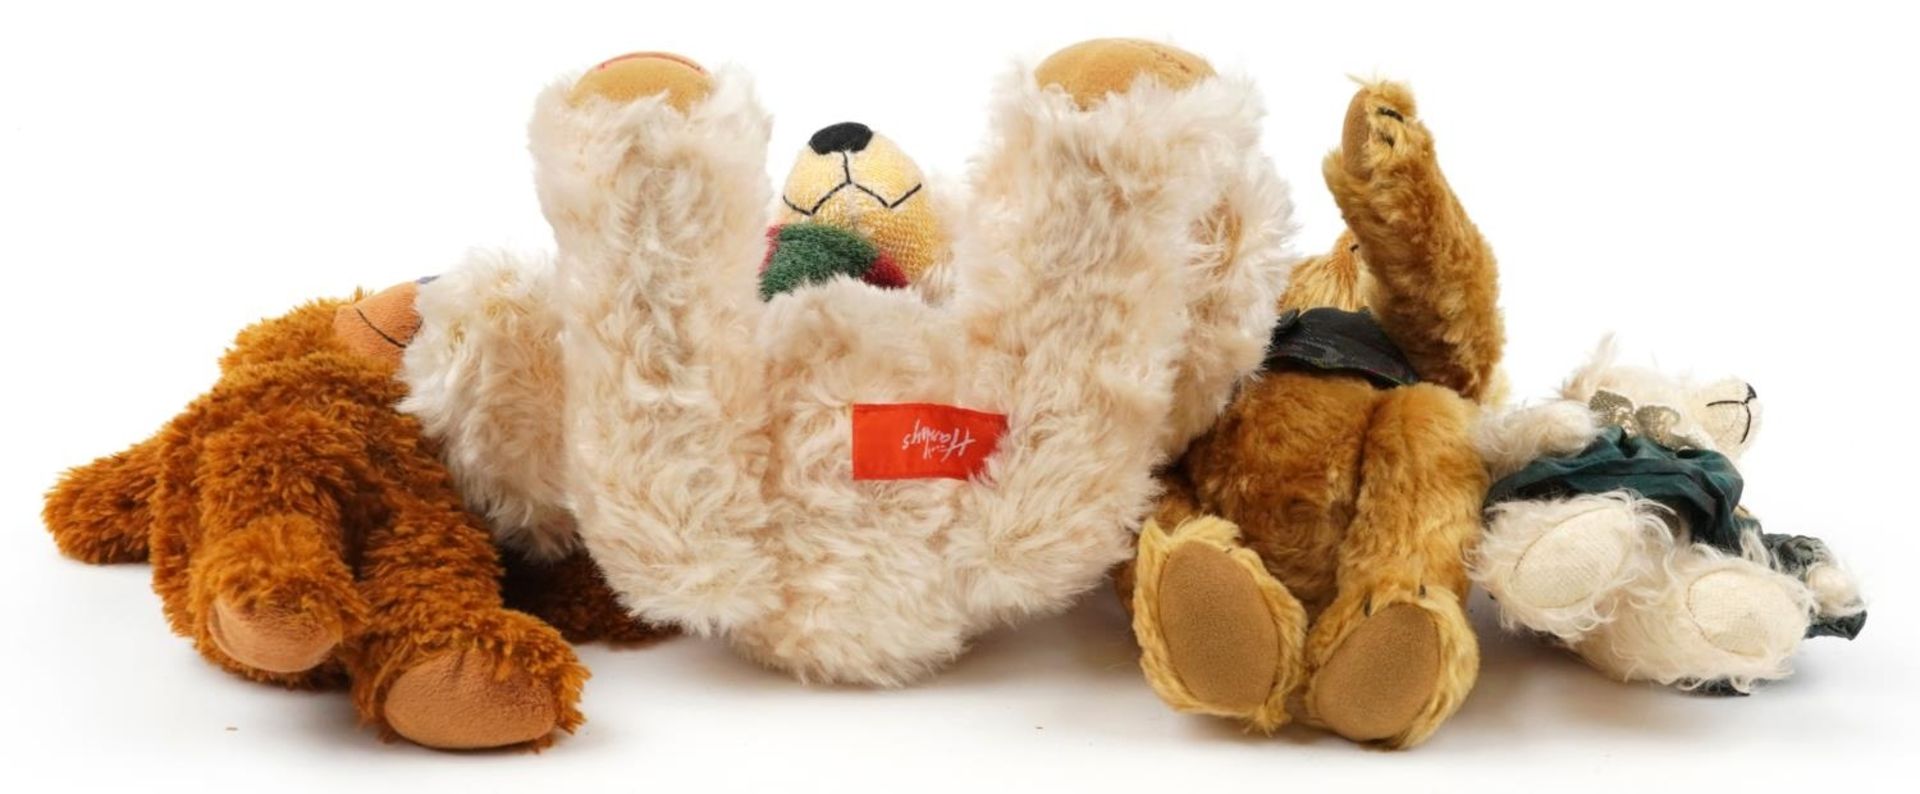 Four teddy bears including Steiff Charly and Hambey's limited edition bear, the largest 32cm - Image 3 of 4